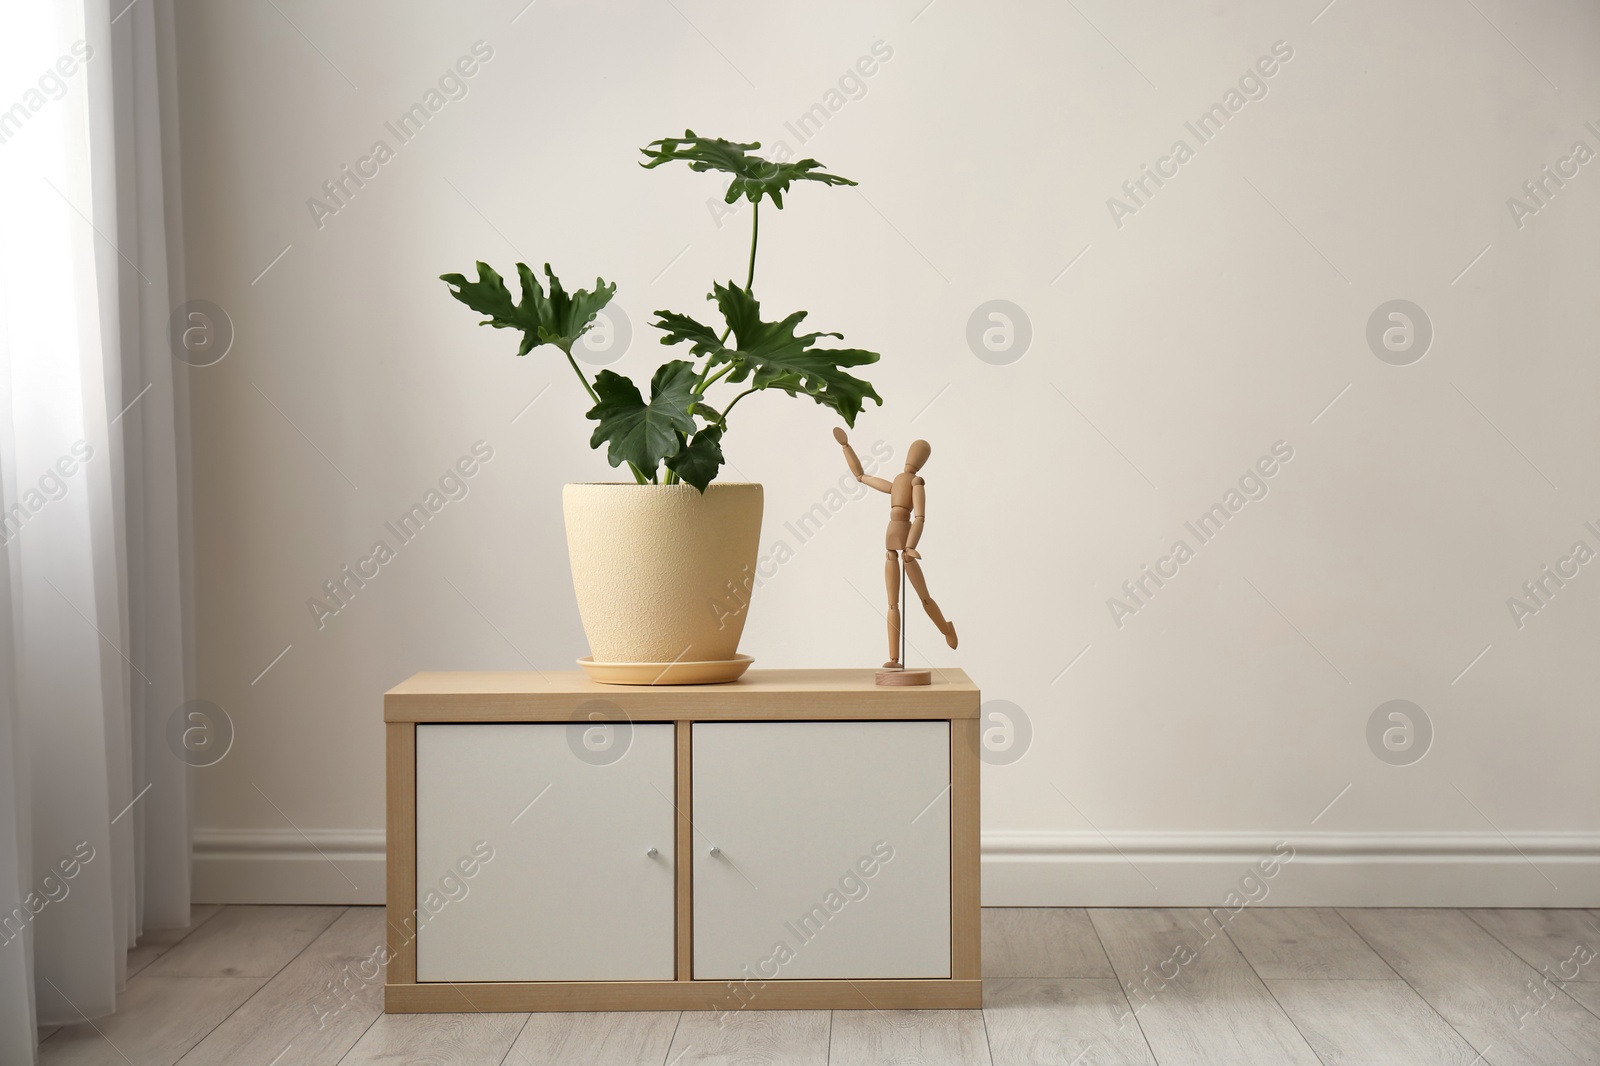 Photo of Tropical plant with green leaves and wooden human figure on cabinet indoors